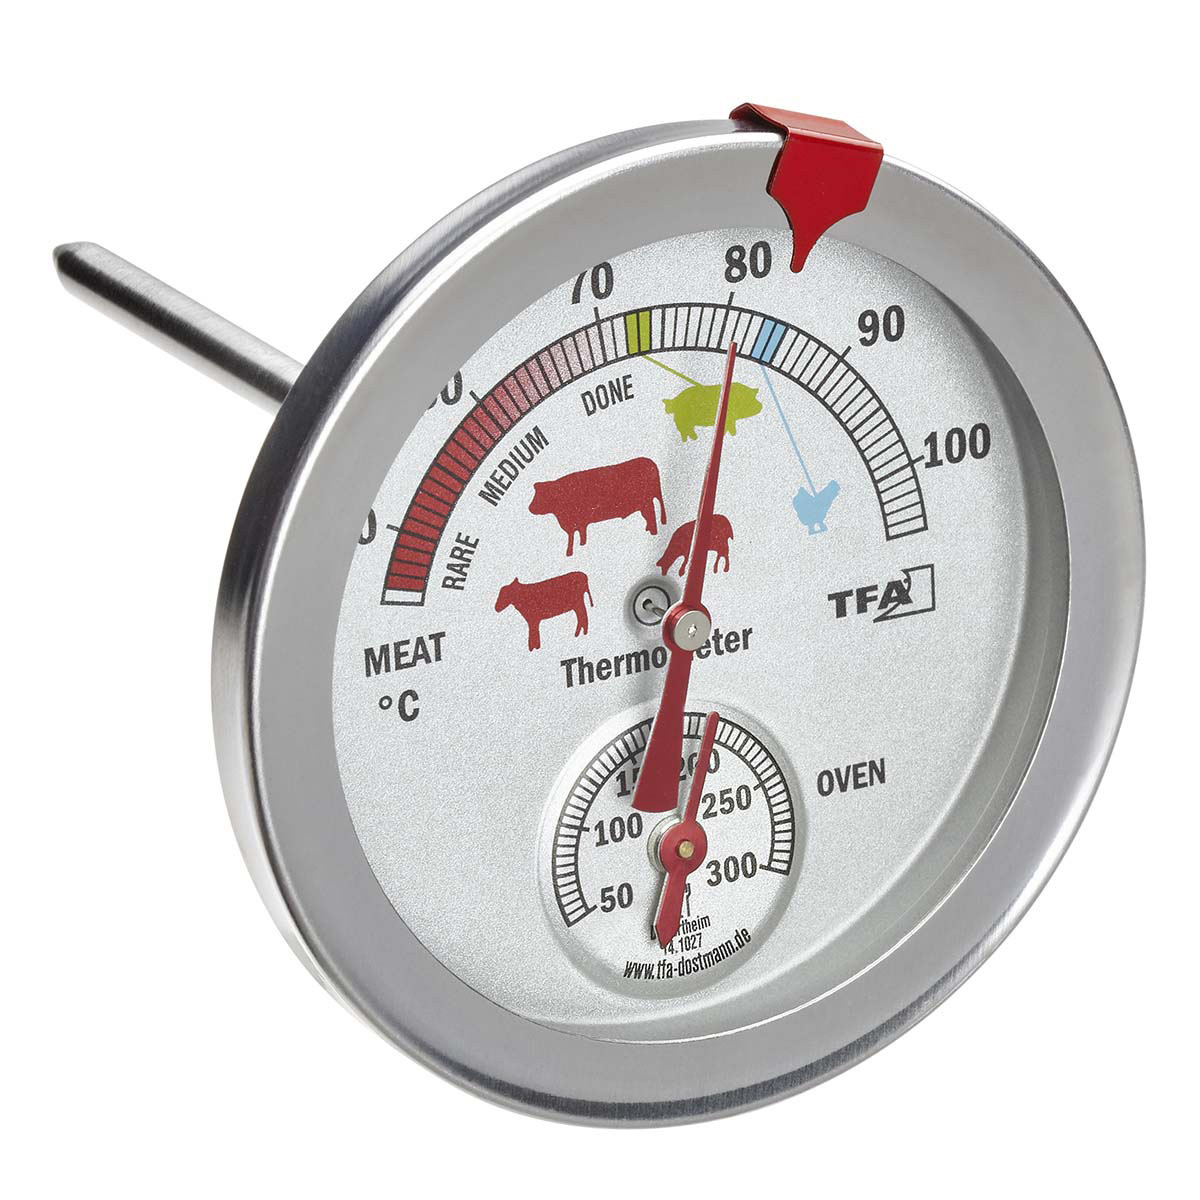 Analoges Braten- / Ofenthermometer